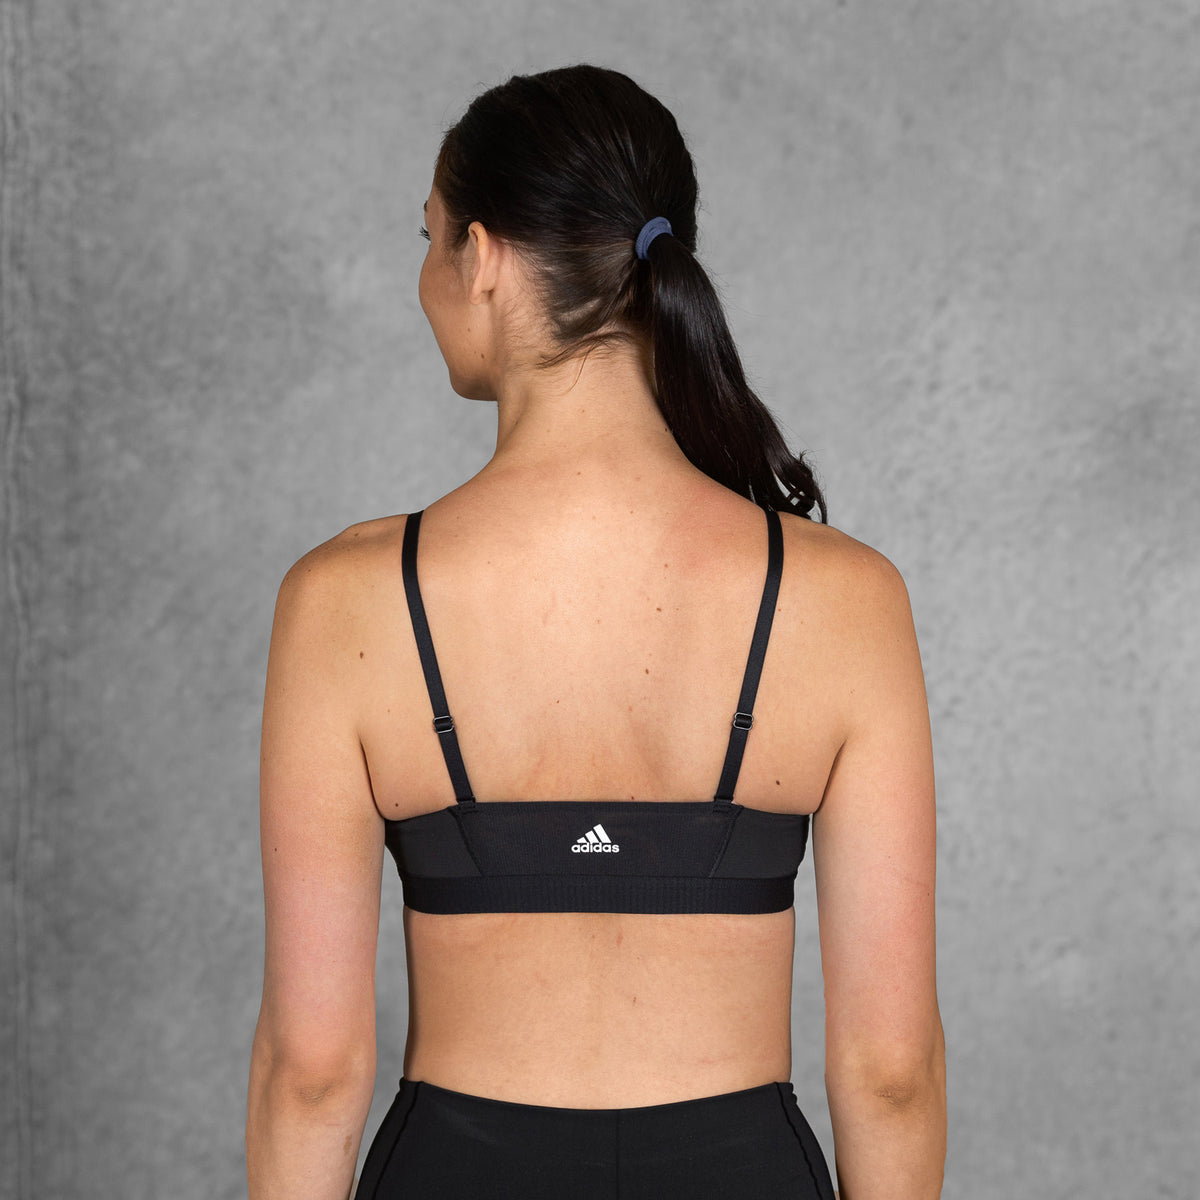 Feel Madness - Adidas sports bra for extra comfort! Shop now :  bit.ly/3HNx3Tl